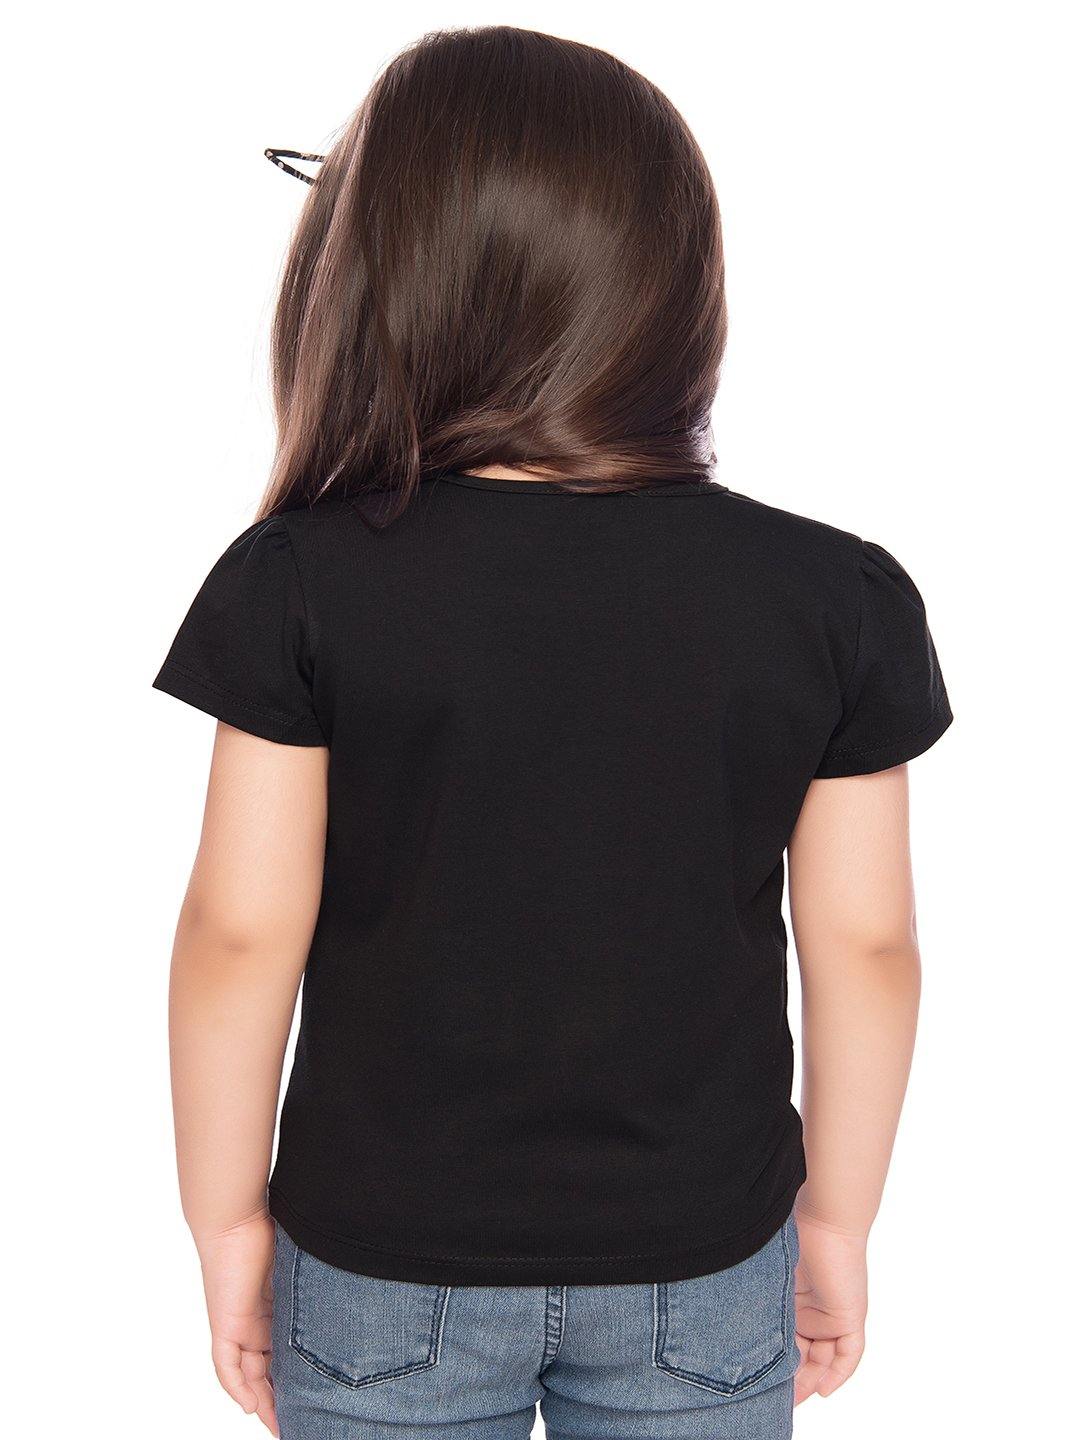 Tiny Baby Black Colored Top - T-109 Black - TINY BABY INDIA shop.tinybaby.in